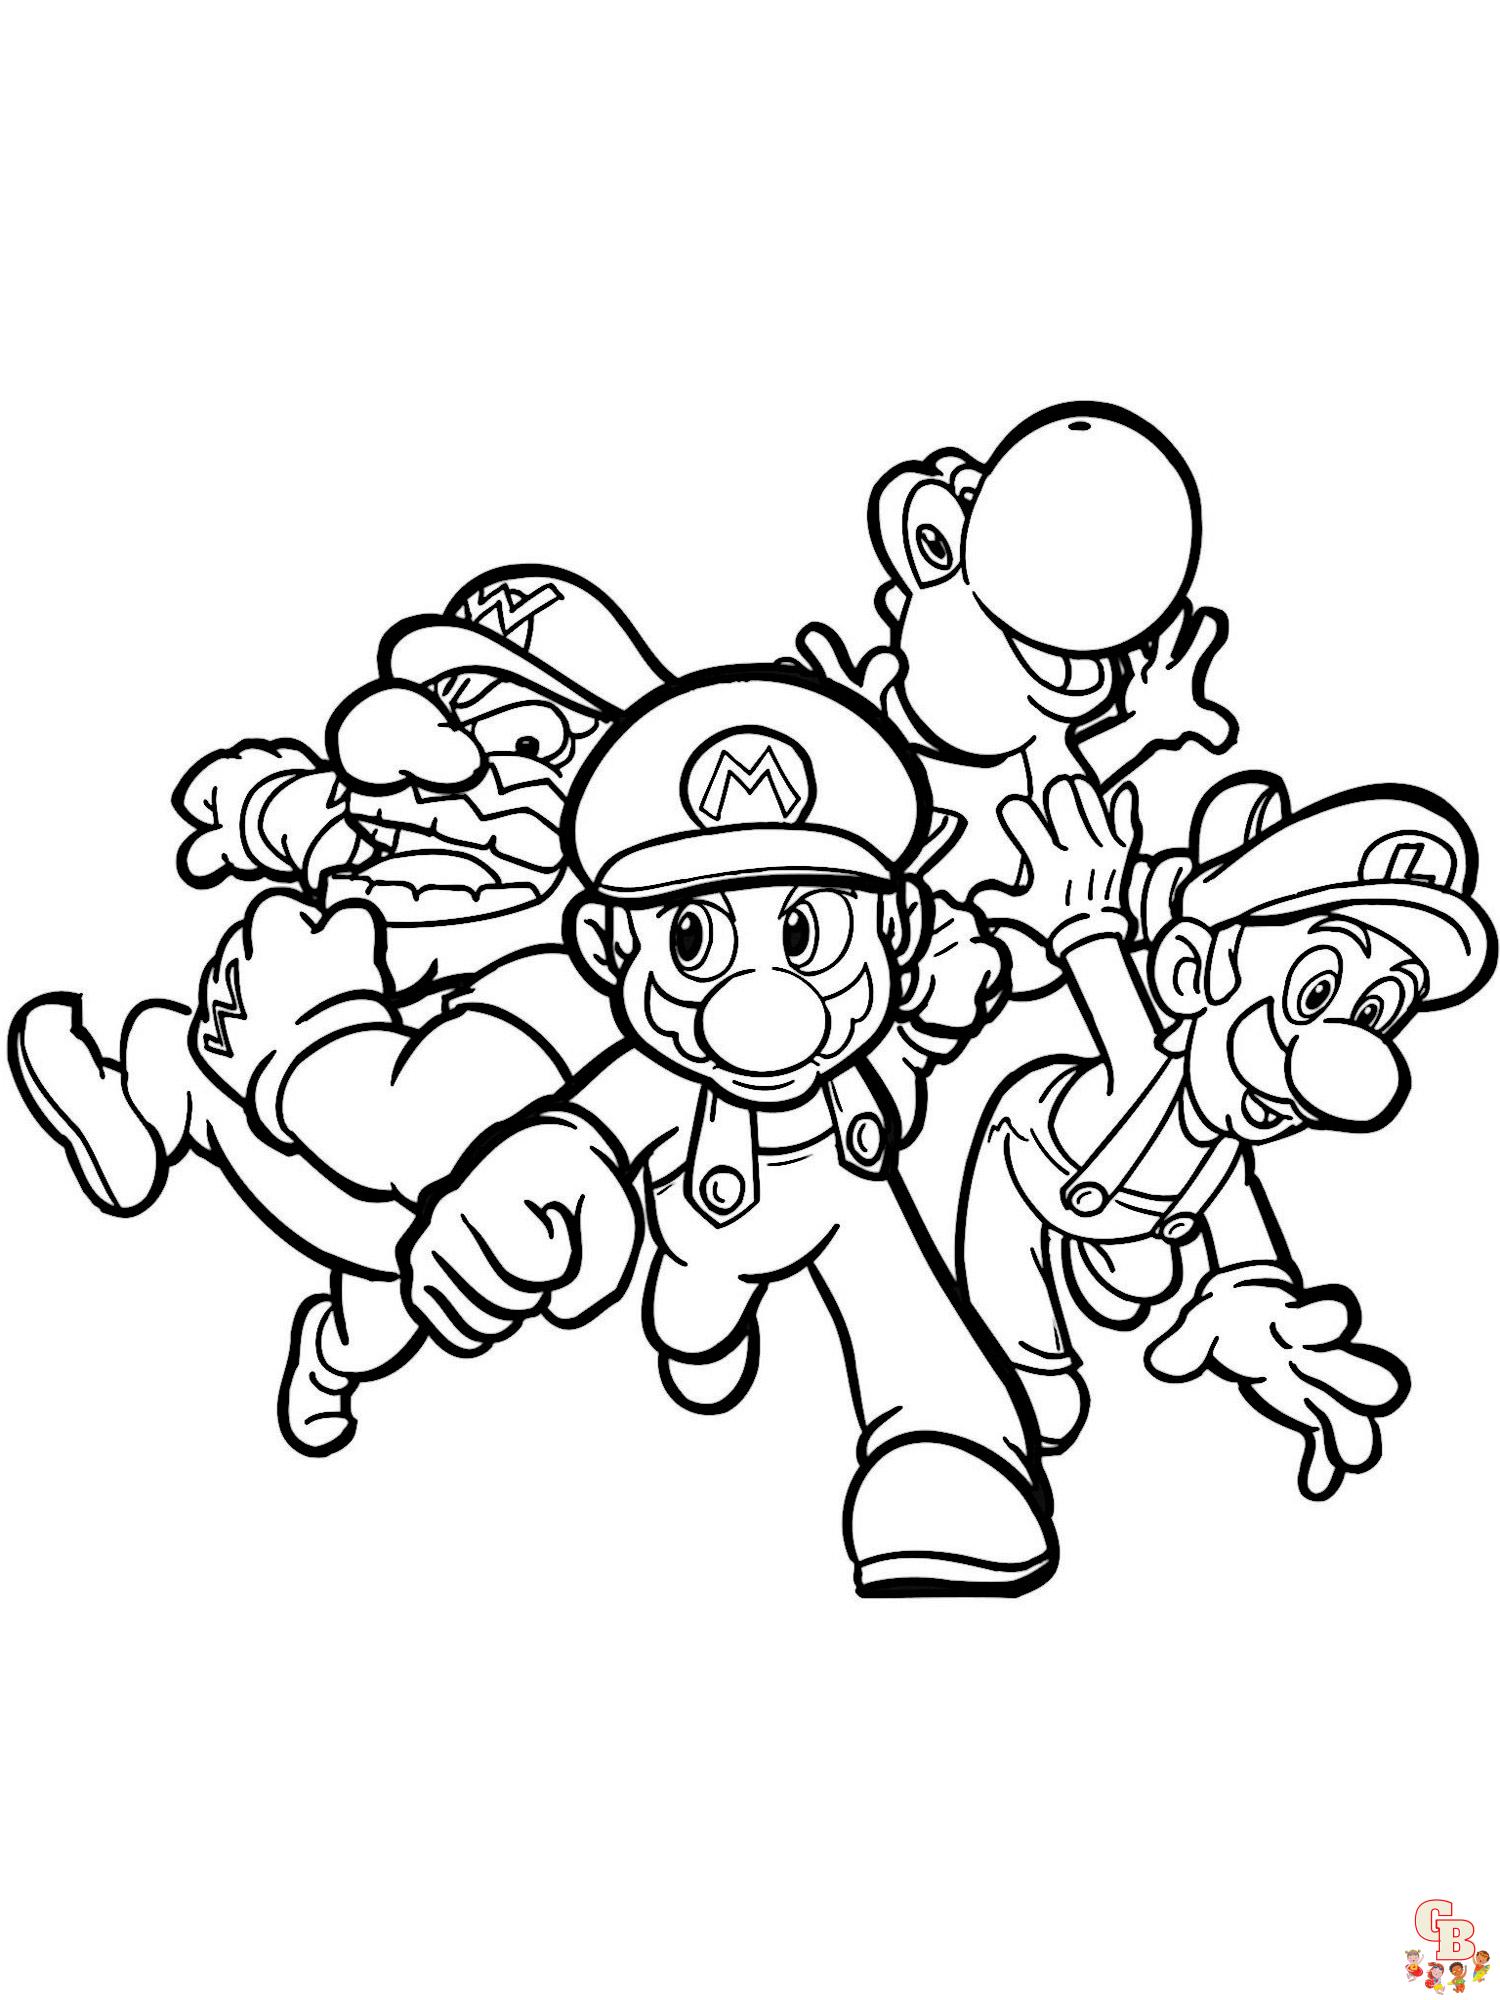 https://gbcoloring.com/wp-content/uploads/2023/02/Super-Mario-Coloring-Pages-3.jpg